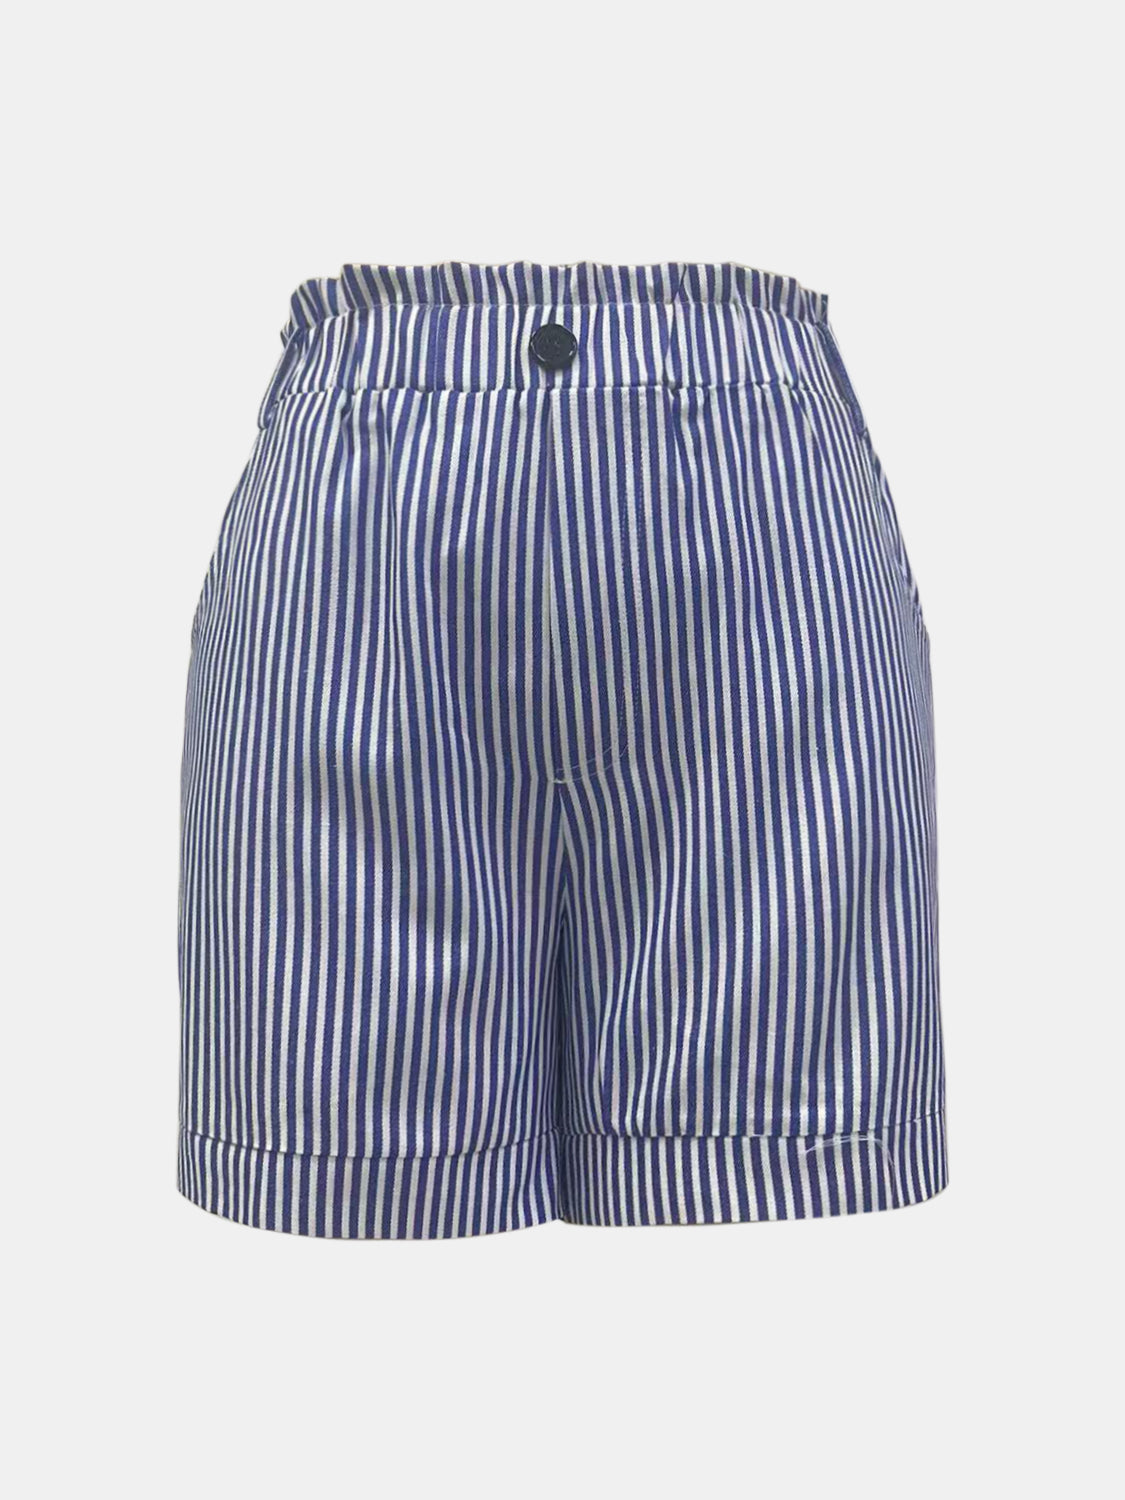 Full Size Striped Shorts with Pockets